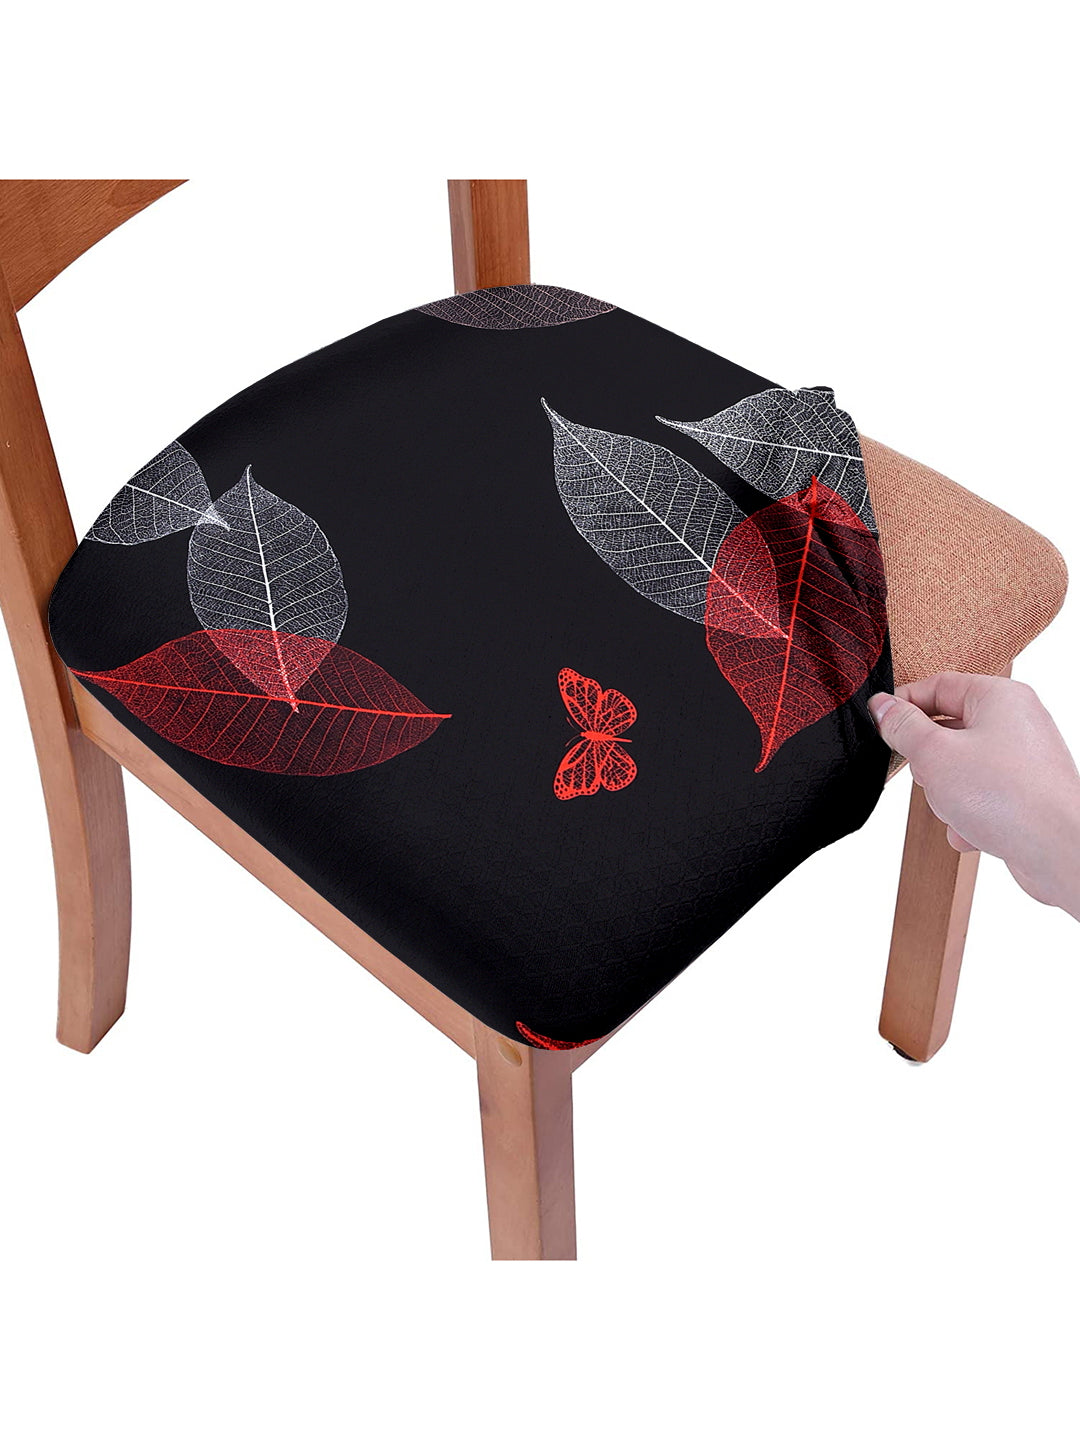 Stretchable Digital Printed Non Slip Chair Pad Cover Pack of 6- Black